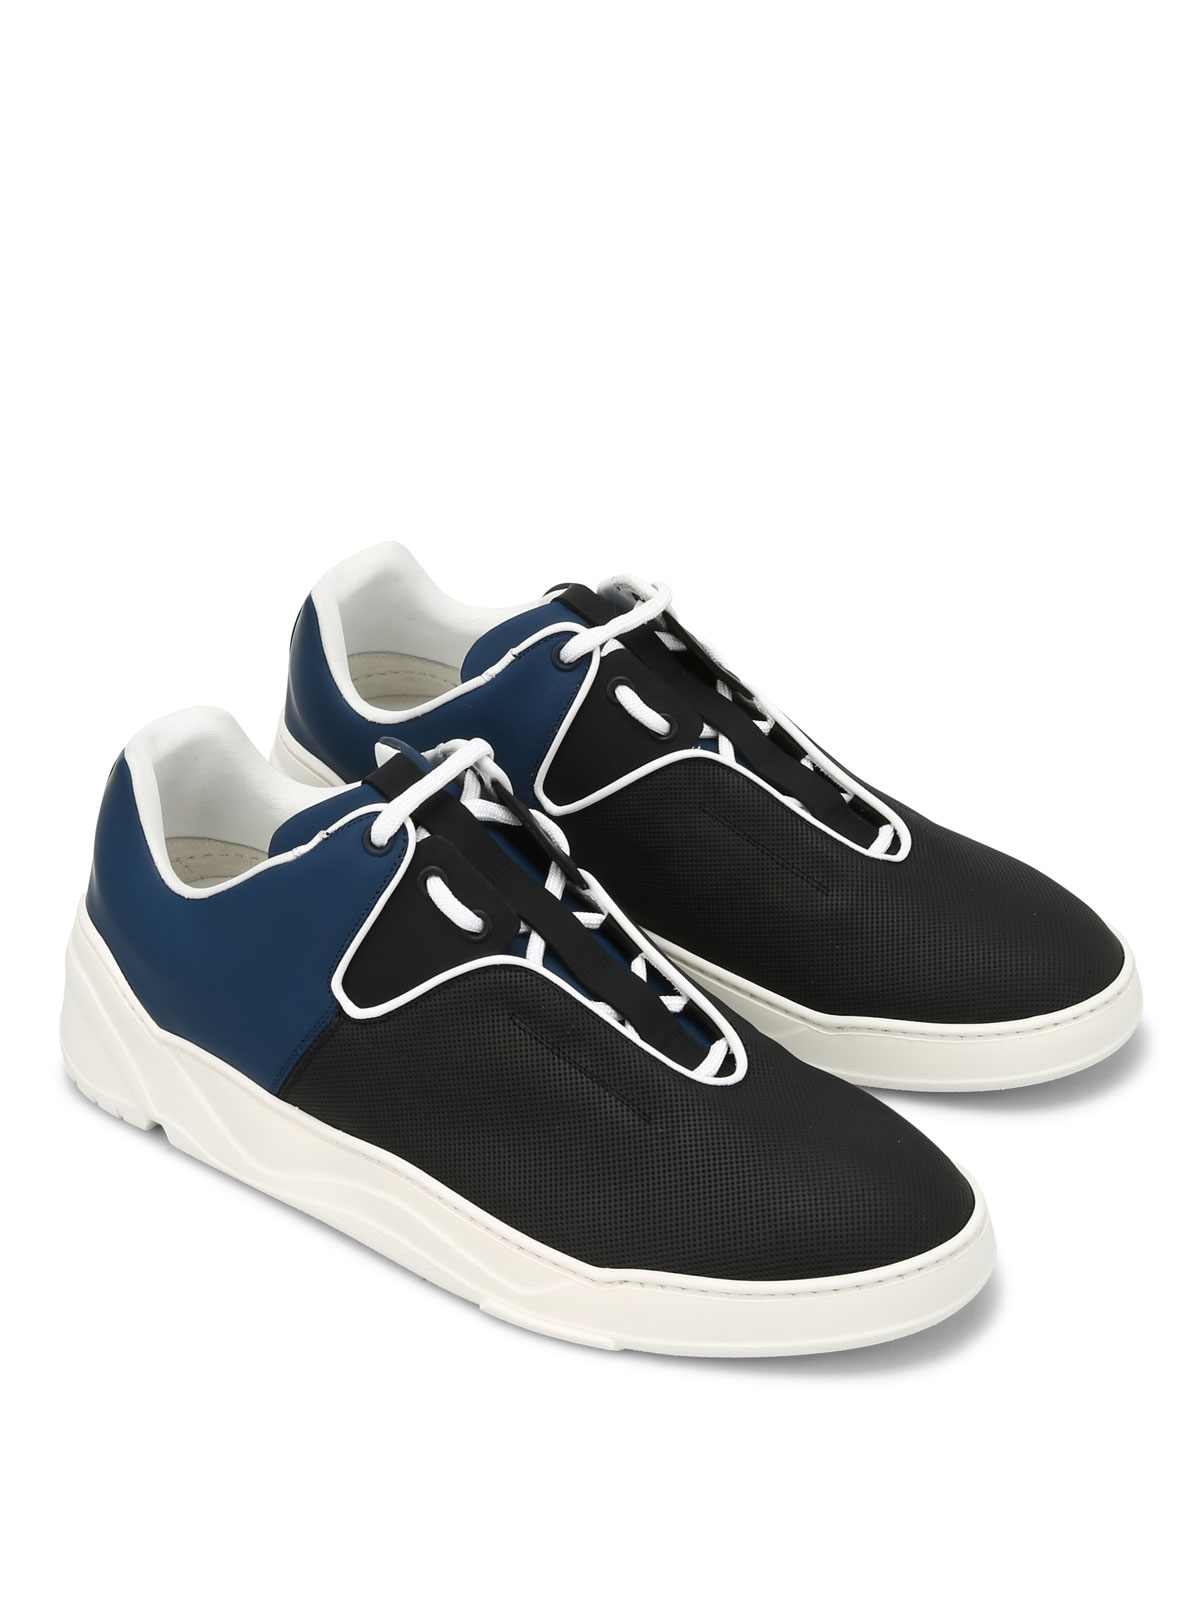 Dior - B17 drilled leather sneakers 